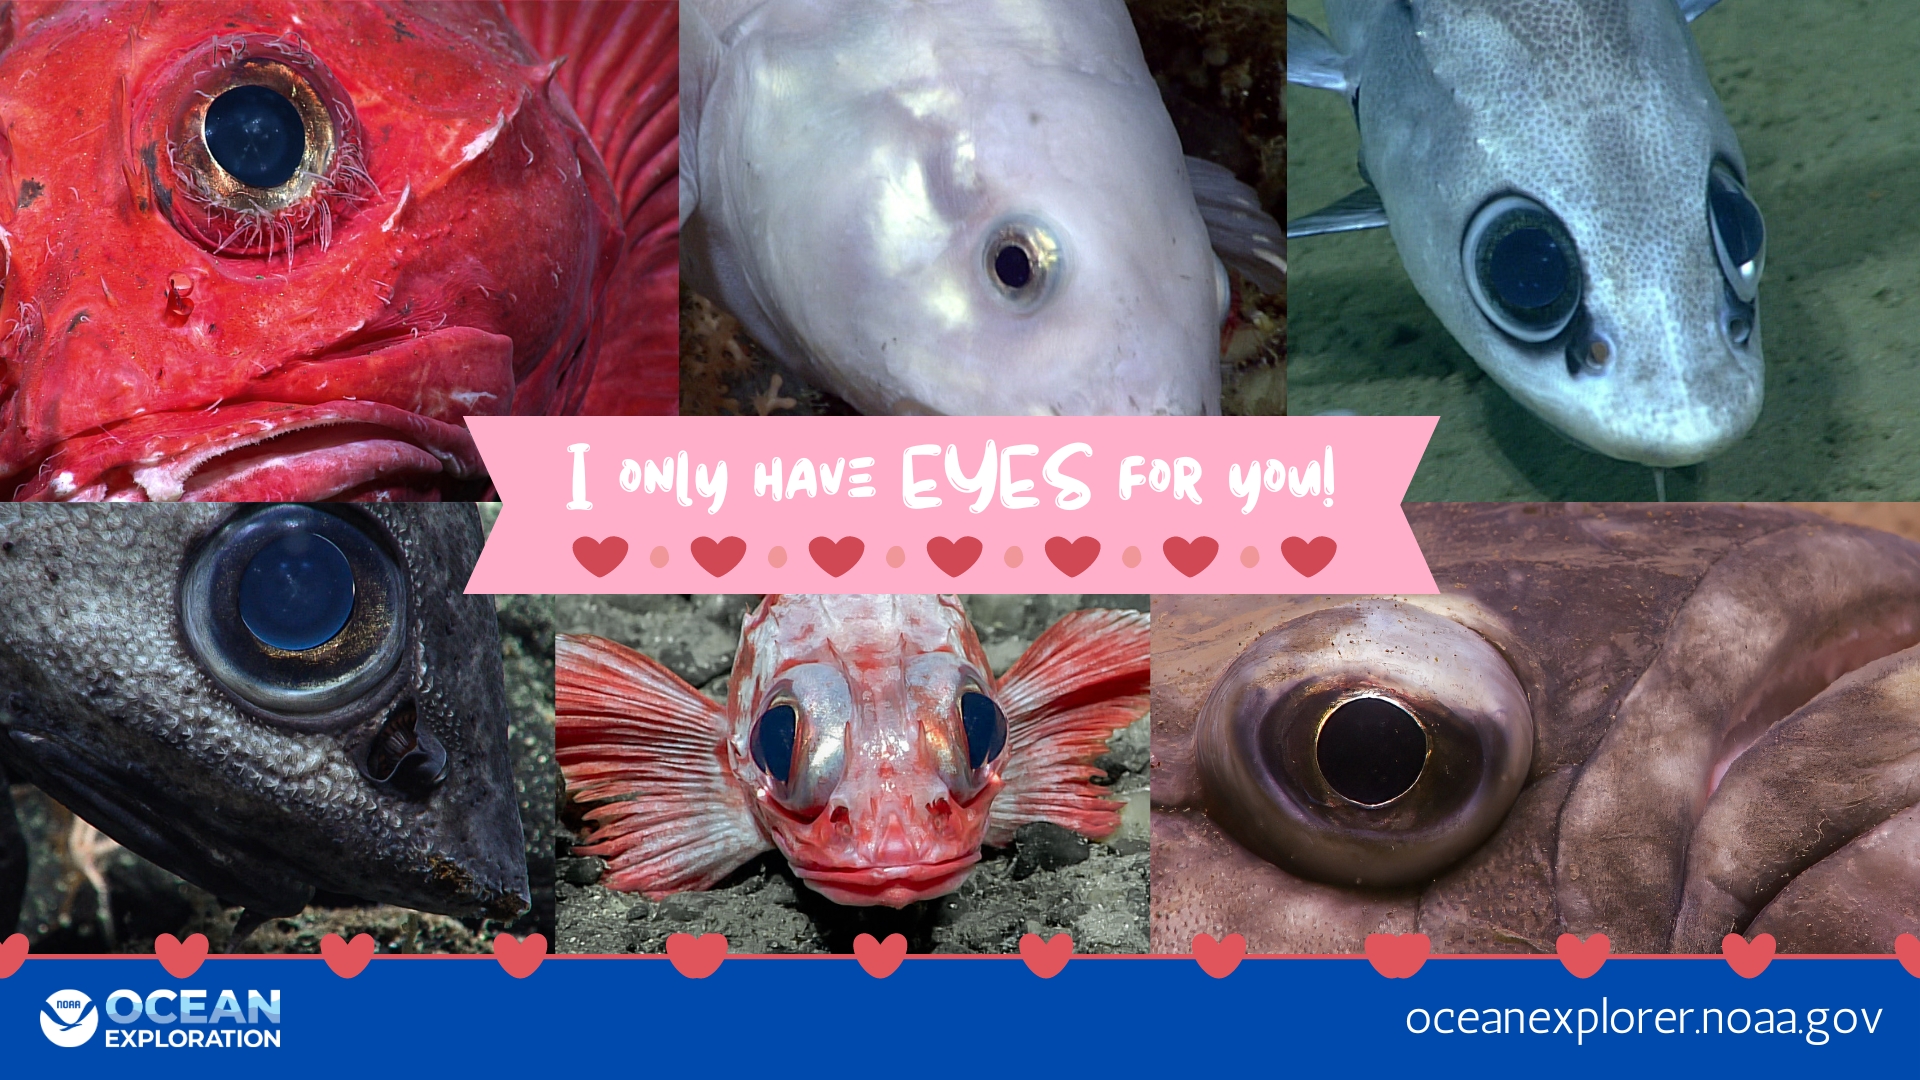 Text: I only have eyes for you! Images of fish eyes